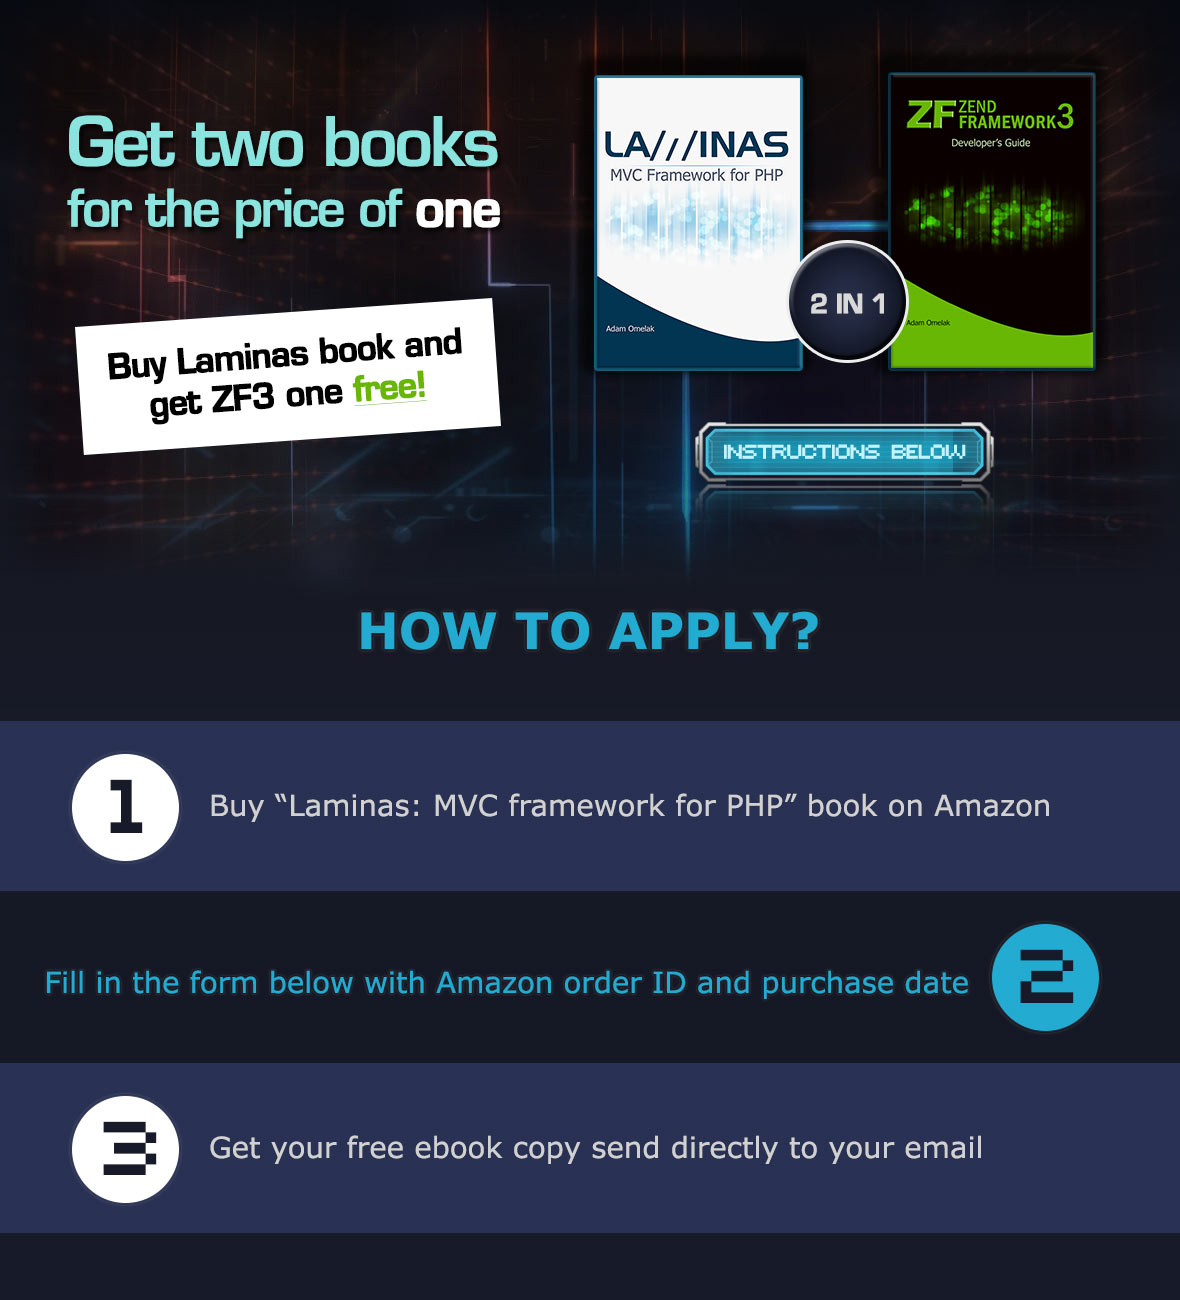 Get two books for the price of one. Buy Laminas book and get ZF3 one free!